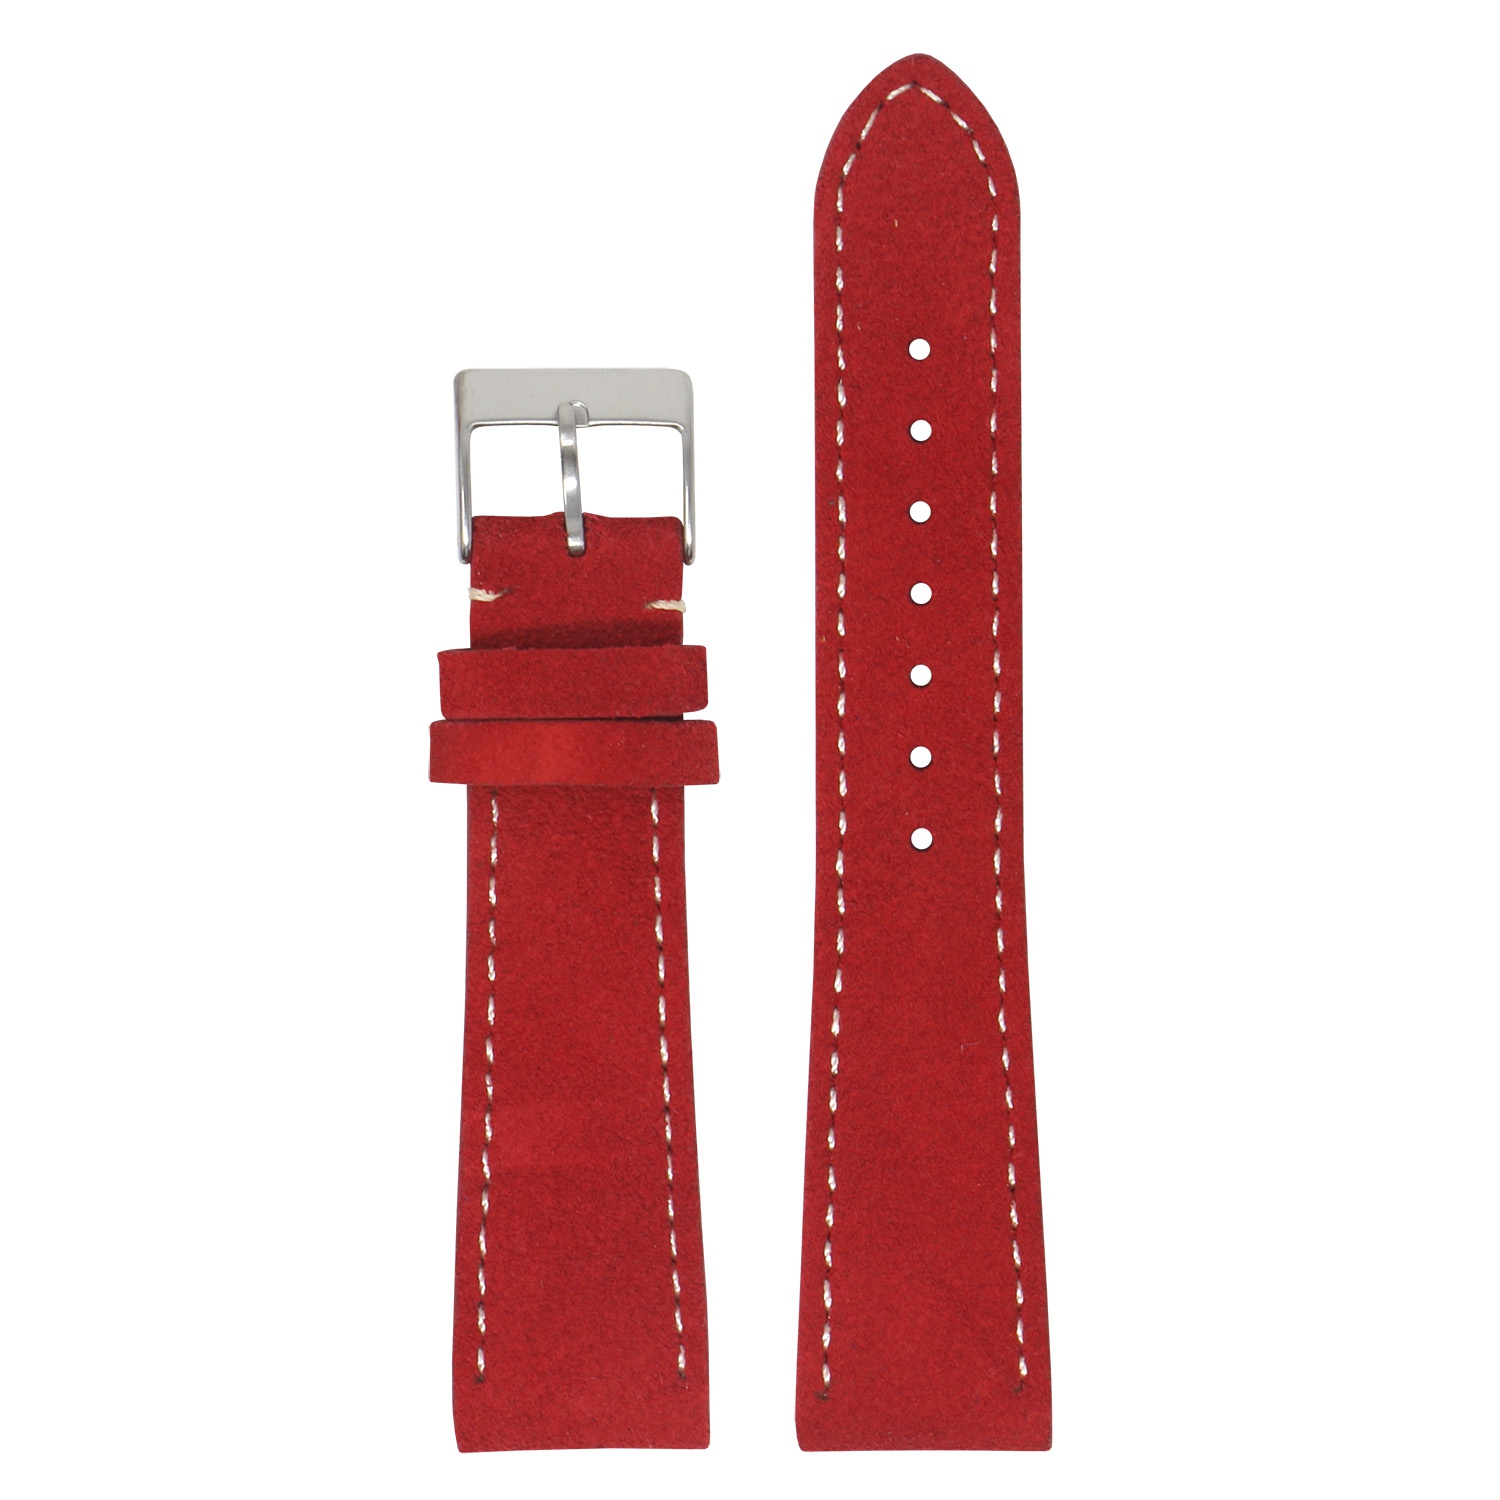 StrapsCo Classic Suede Watch Band Strap (Short, Standard, Long) for Fitbit Charge 4 & Charge 3 - Long - Red